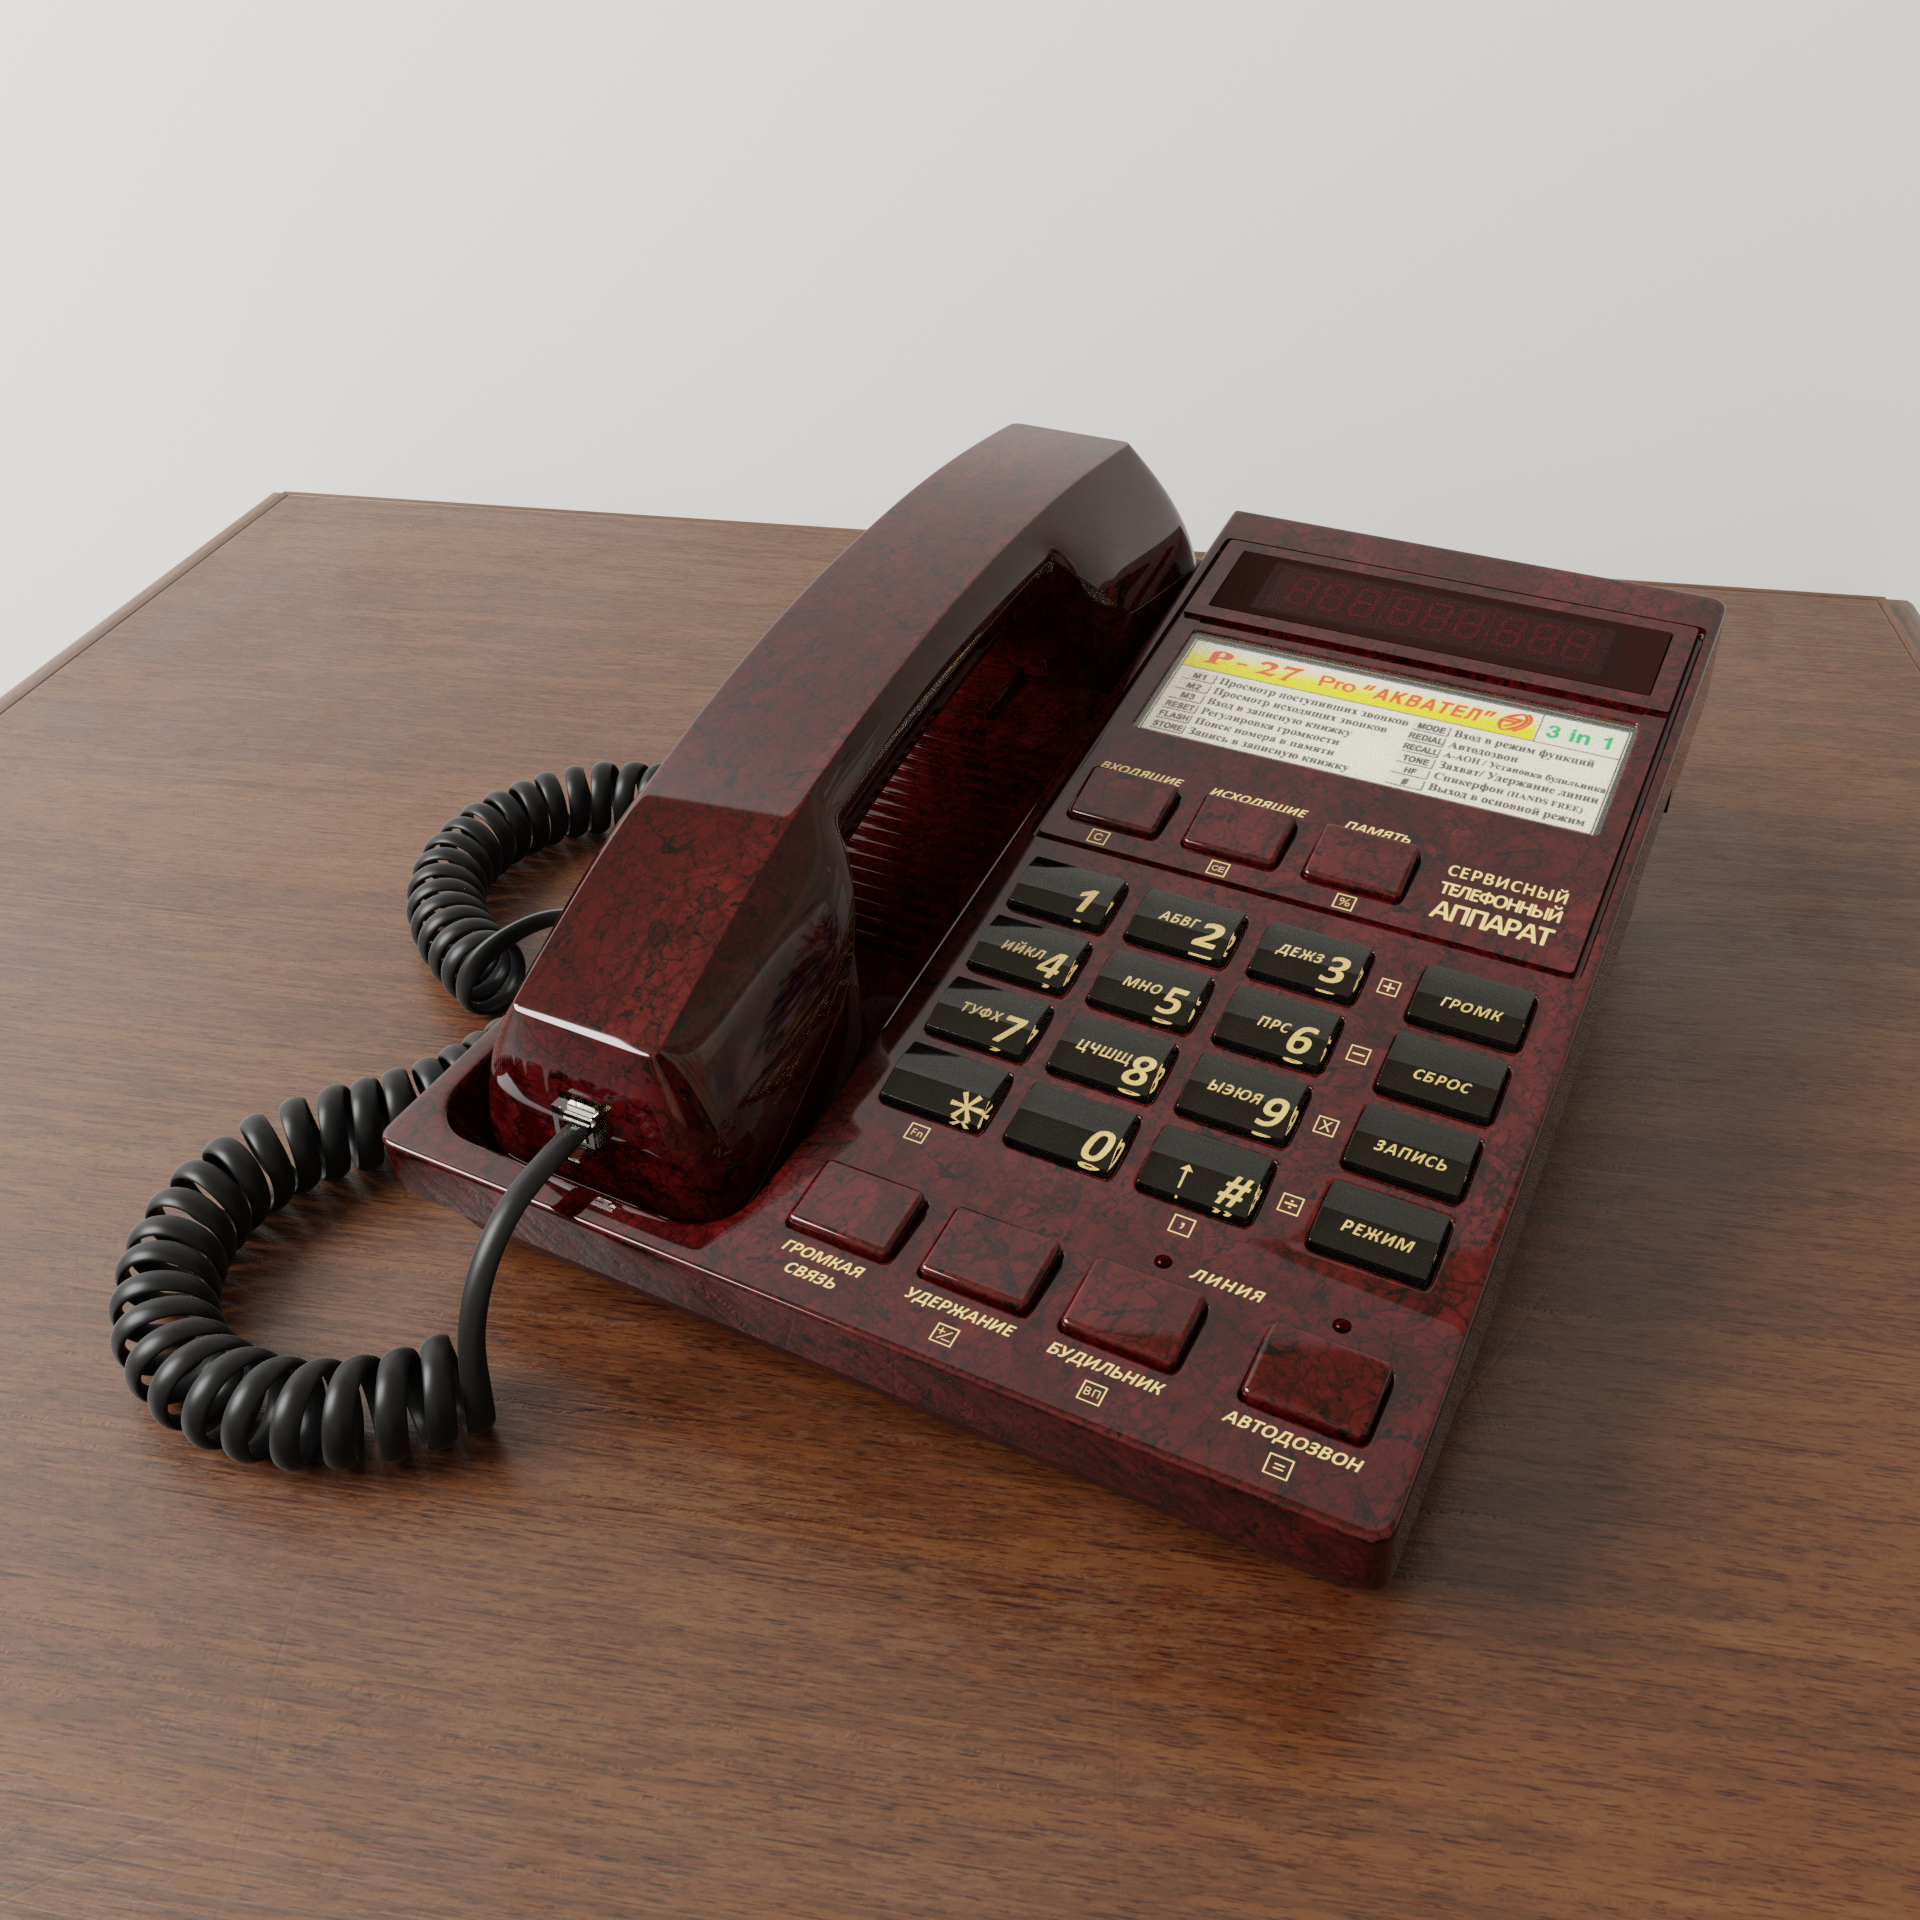 Telephone P-27 preview image 1